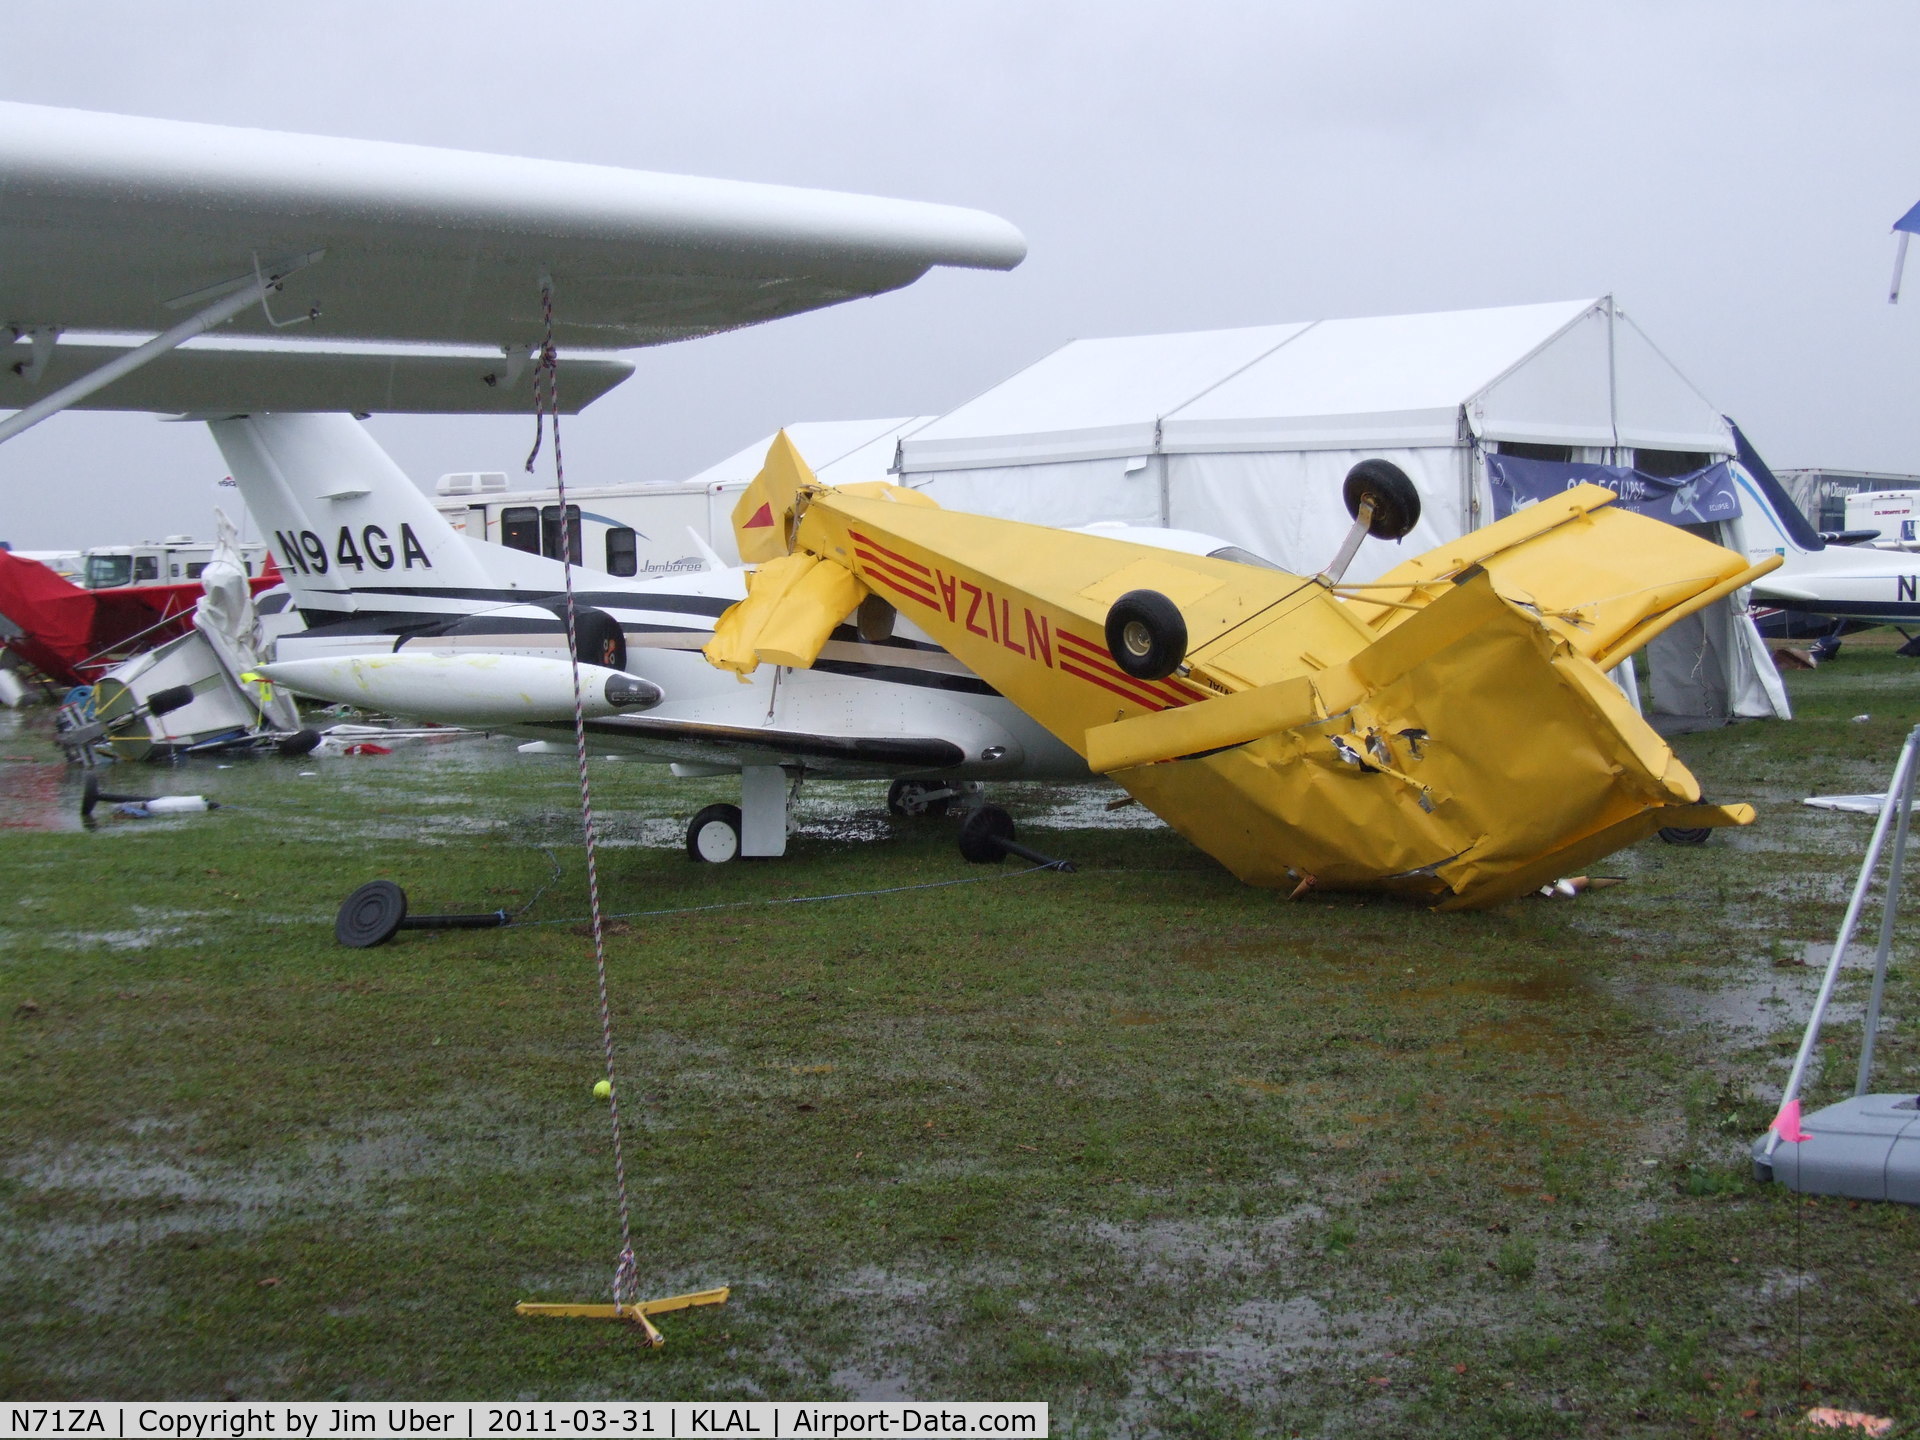 N71ZA, Zenith STOL CH-701 C/N 7-7186, A reaL bad day at the Zenith booth...
This is just an hour or so after what was described as a tornado came rolling through.